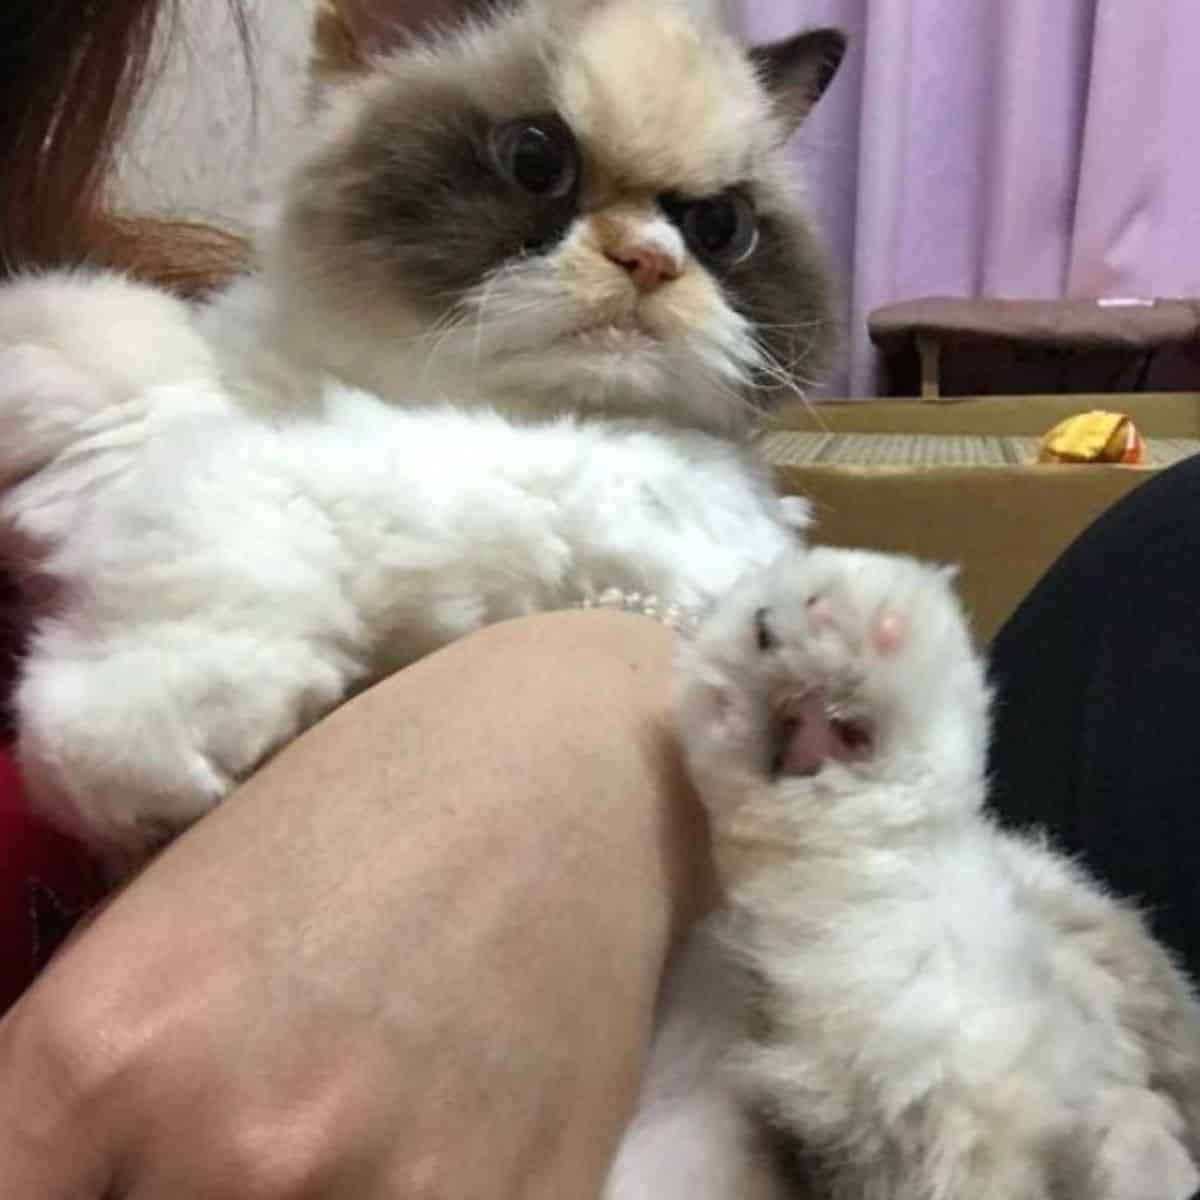 a grumpy cat in the hands of a woman looks around